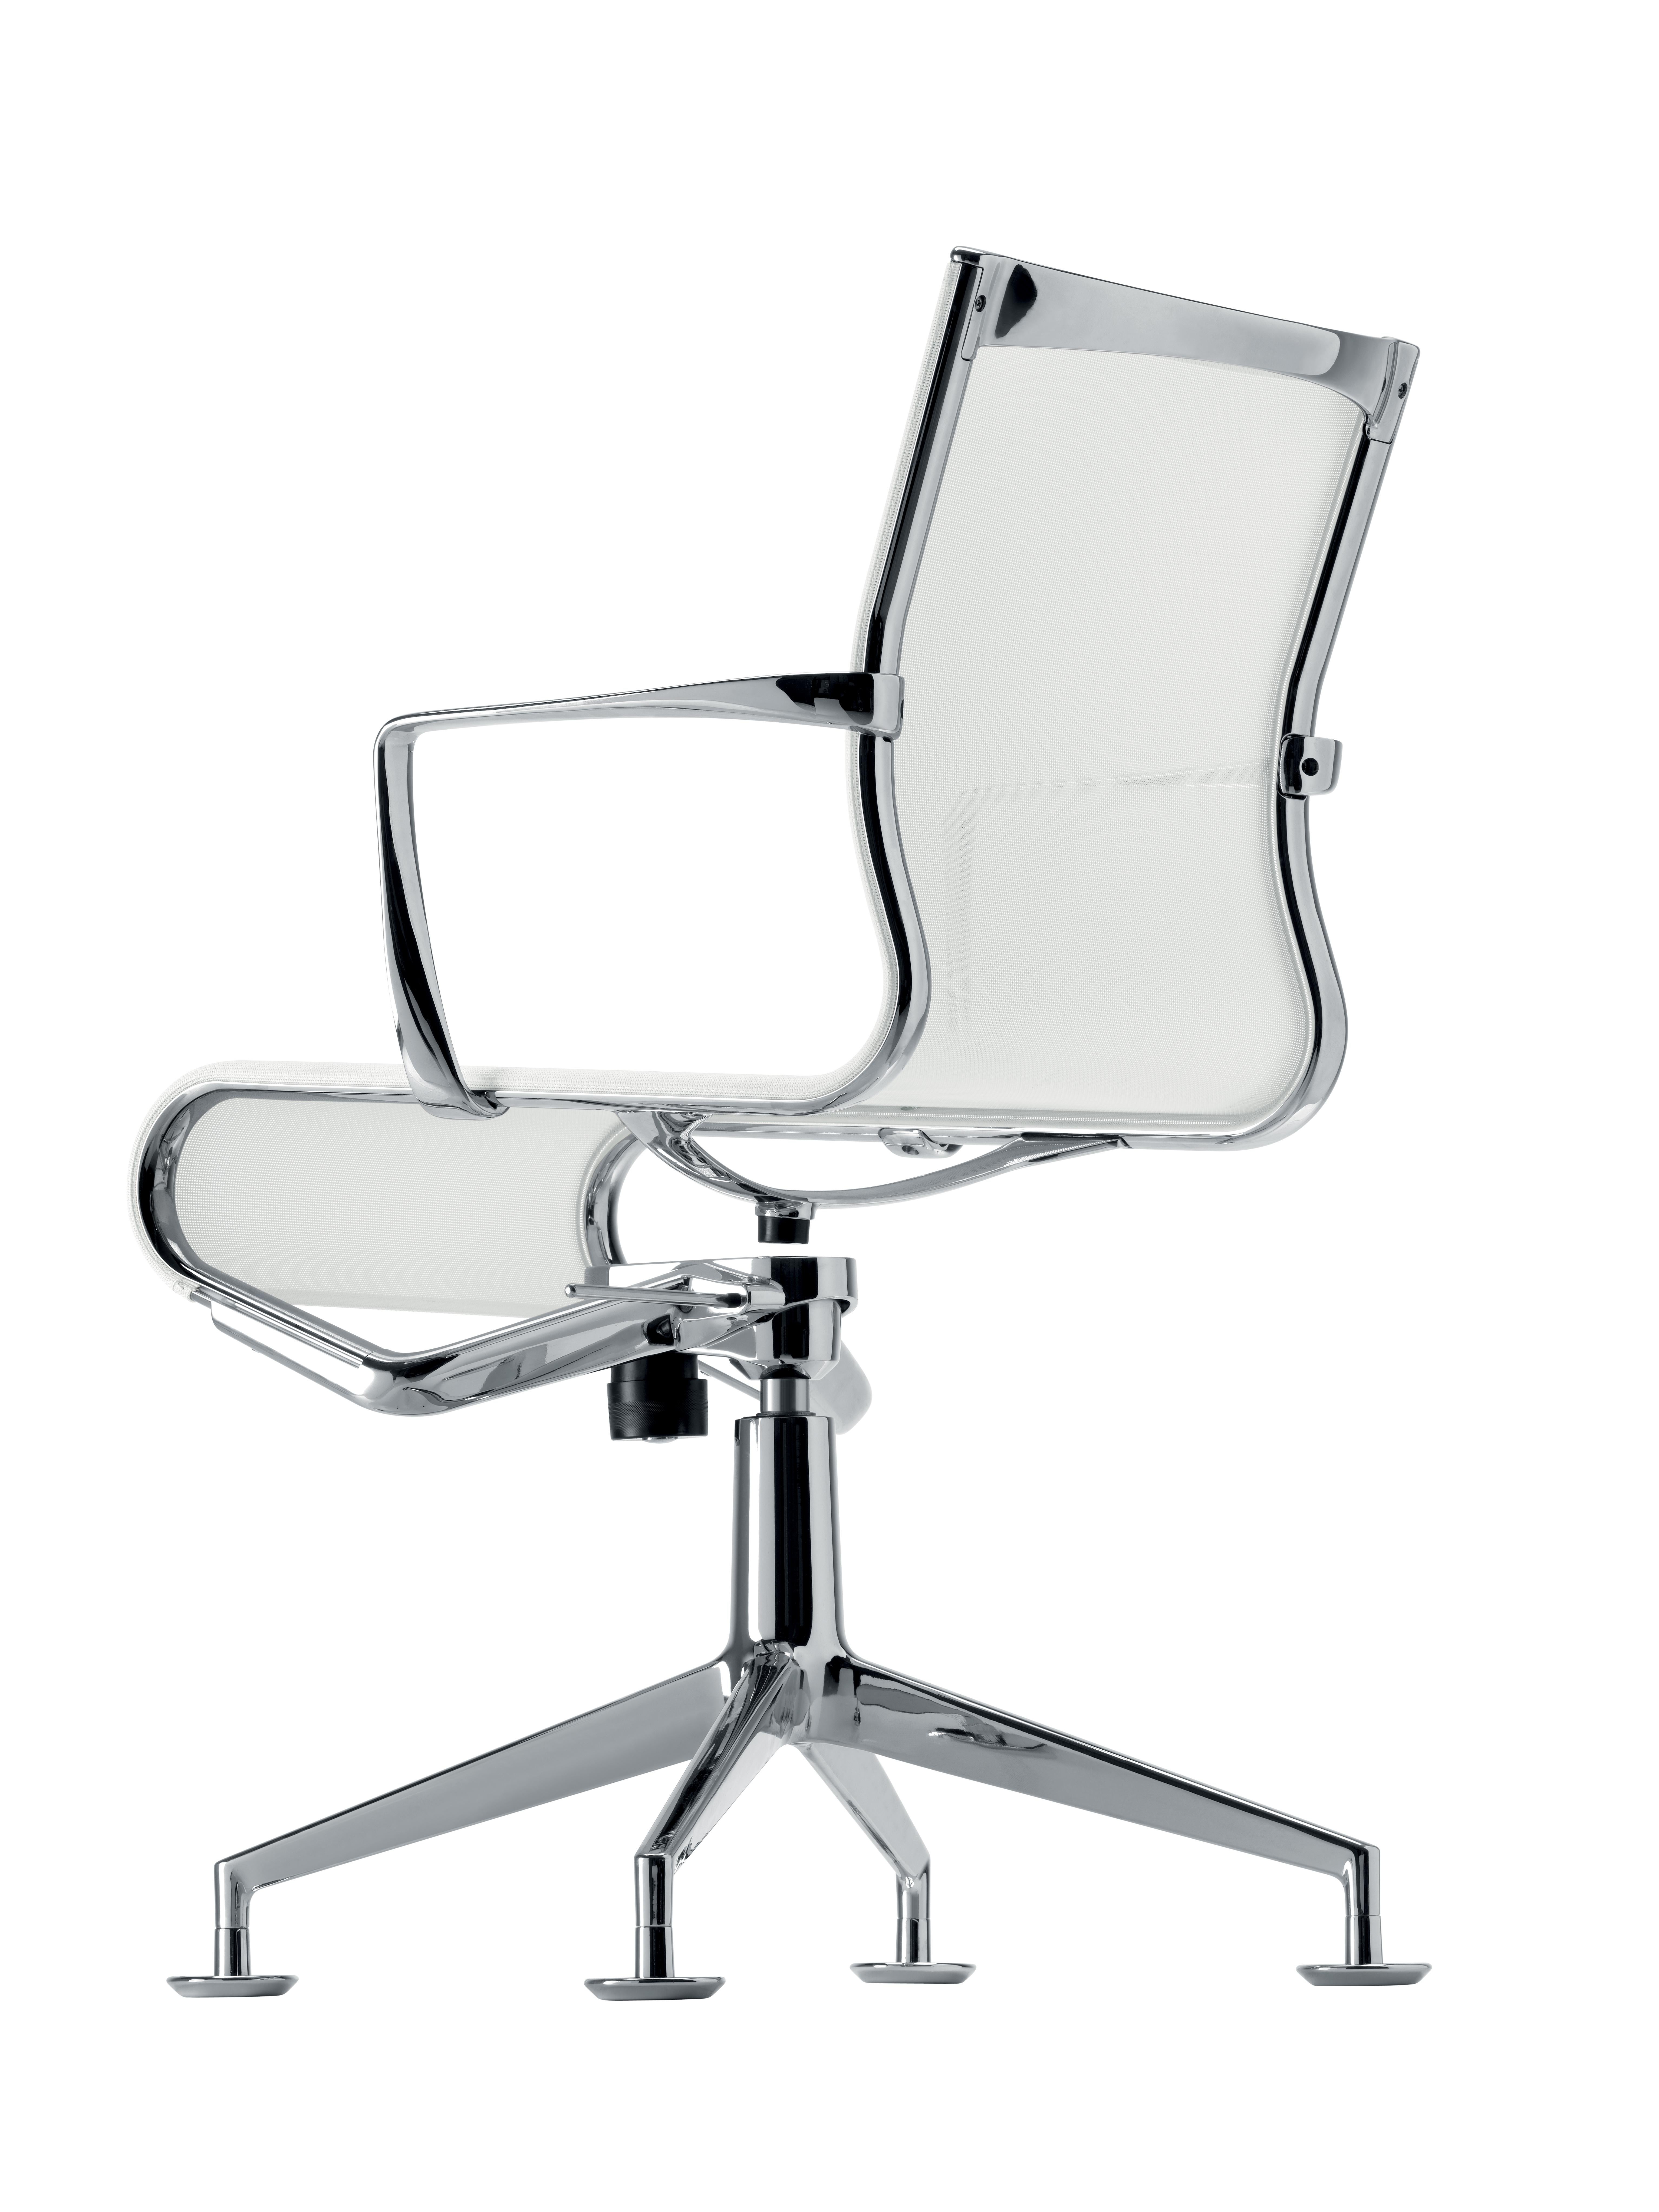 Alias 447 Meetingframe+ Tilt 47 Chair in White Mesh with Chromed Aluminum Frame by Alberto Meda

Self adjusting swivel chair with arms, with 4-star base with glides and tilting mechanism. Structure made of extruded aluminium profile and die-cast